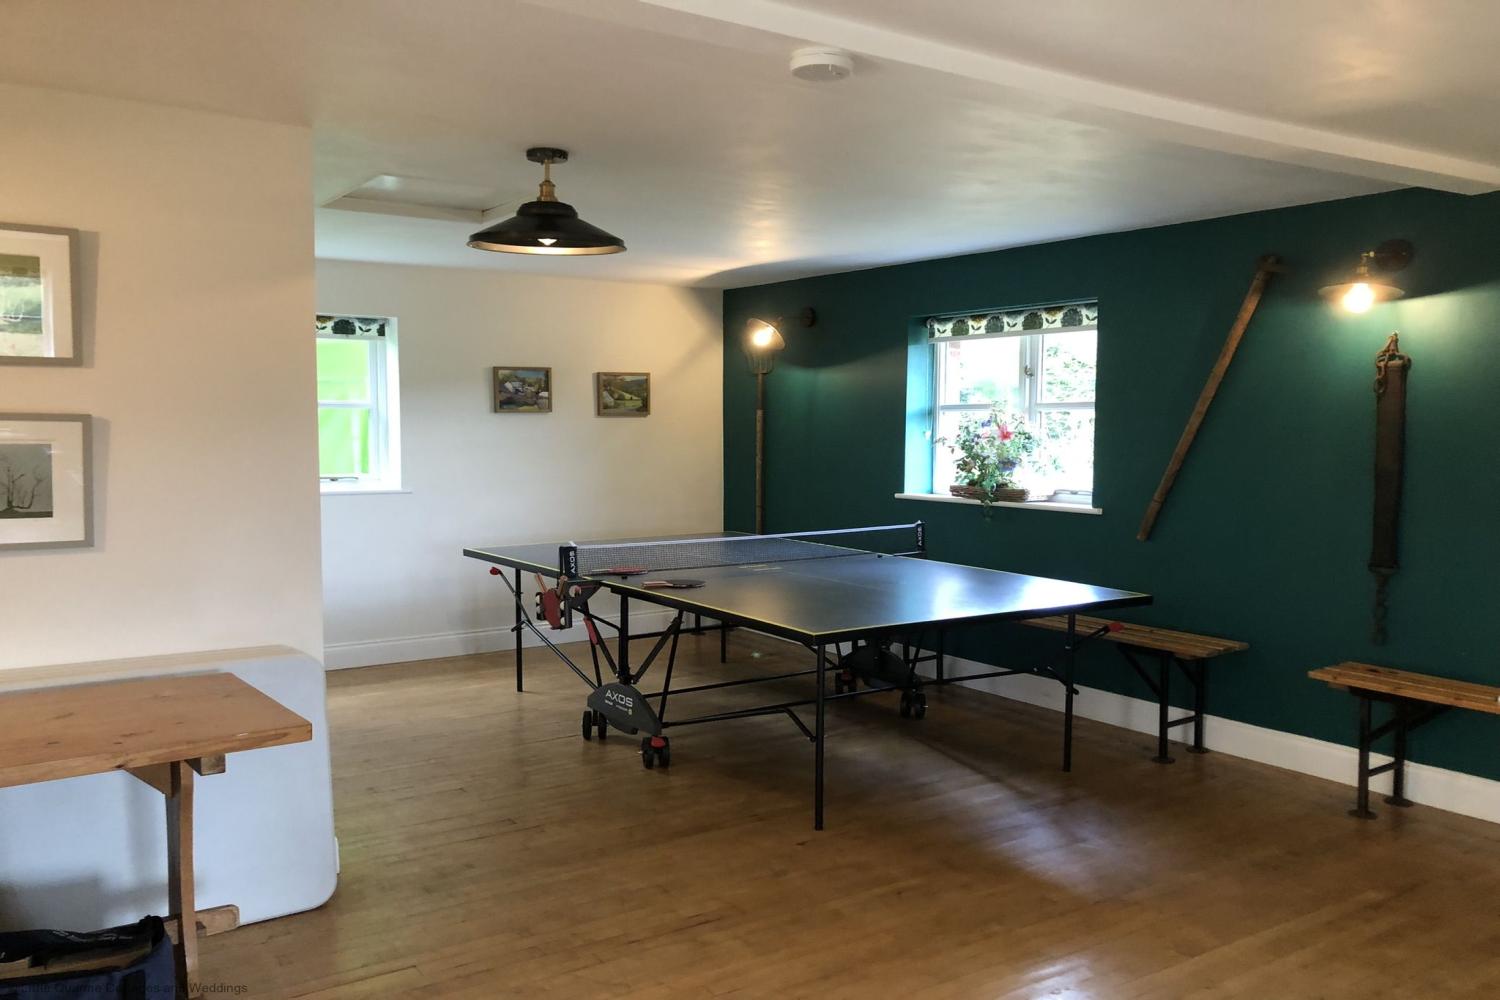 The barn/games room